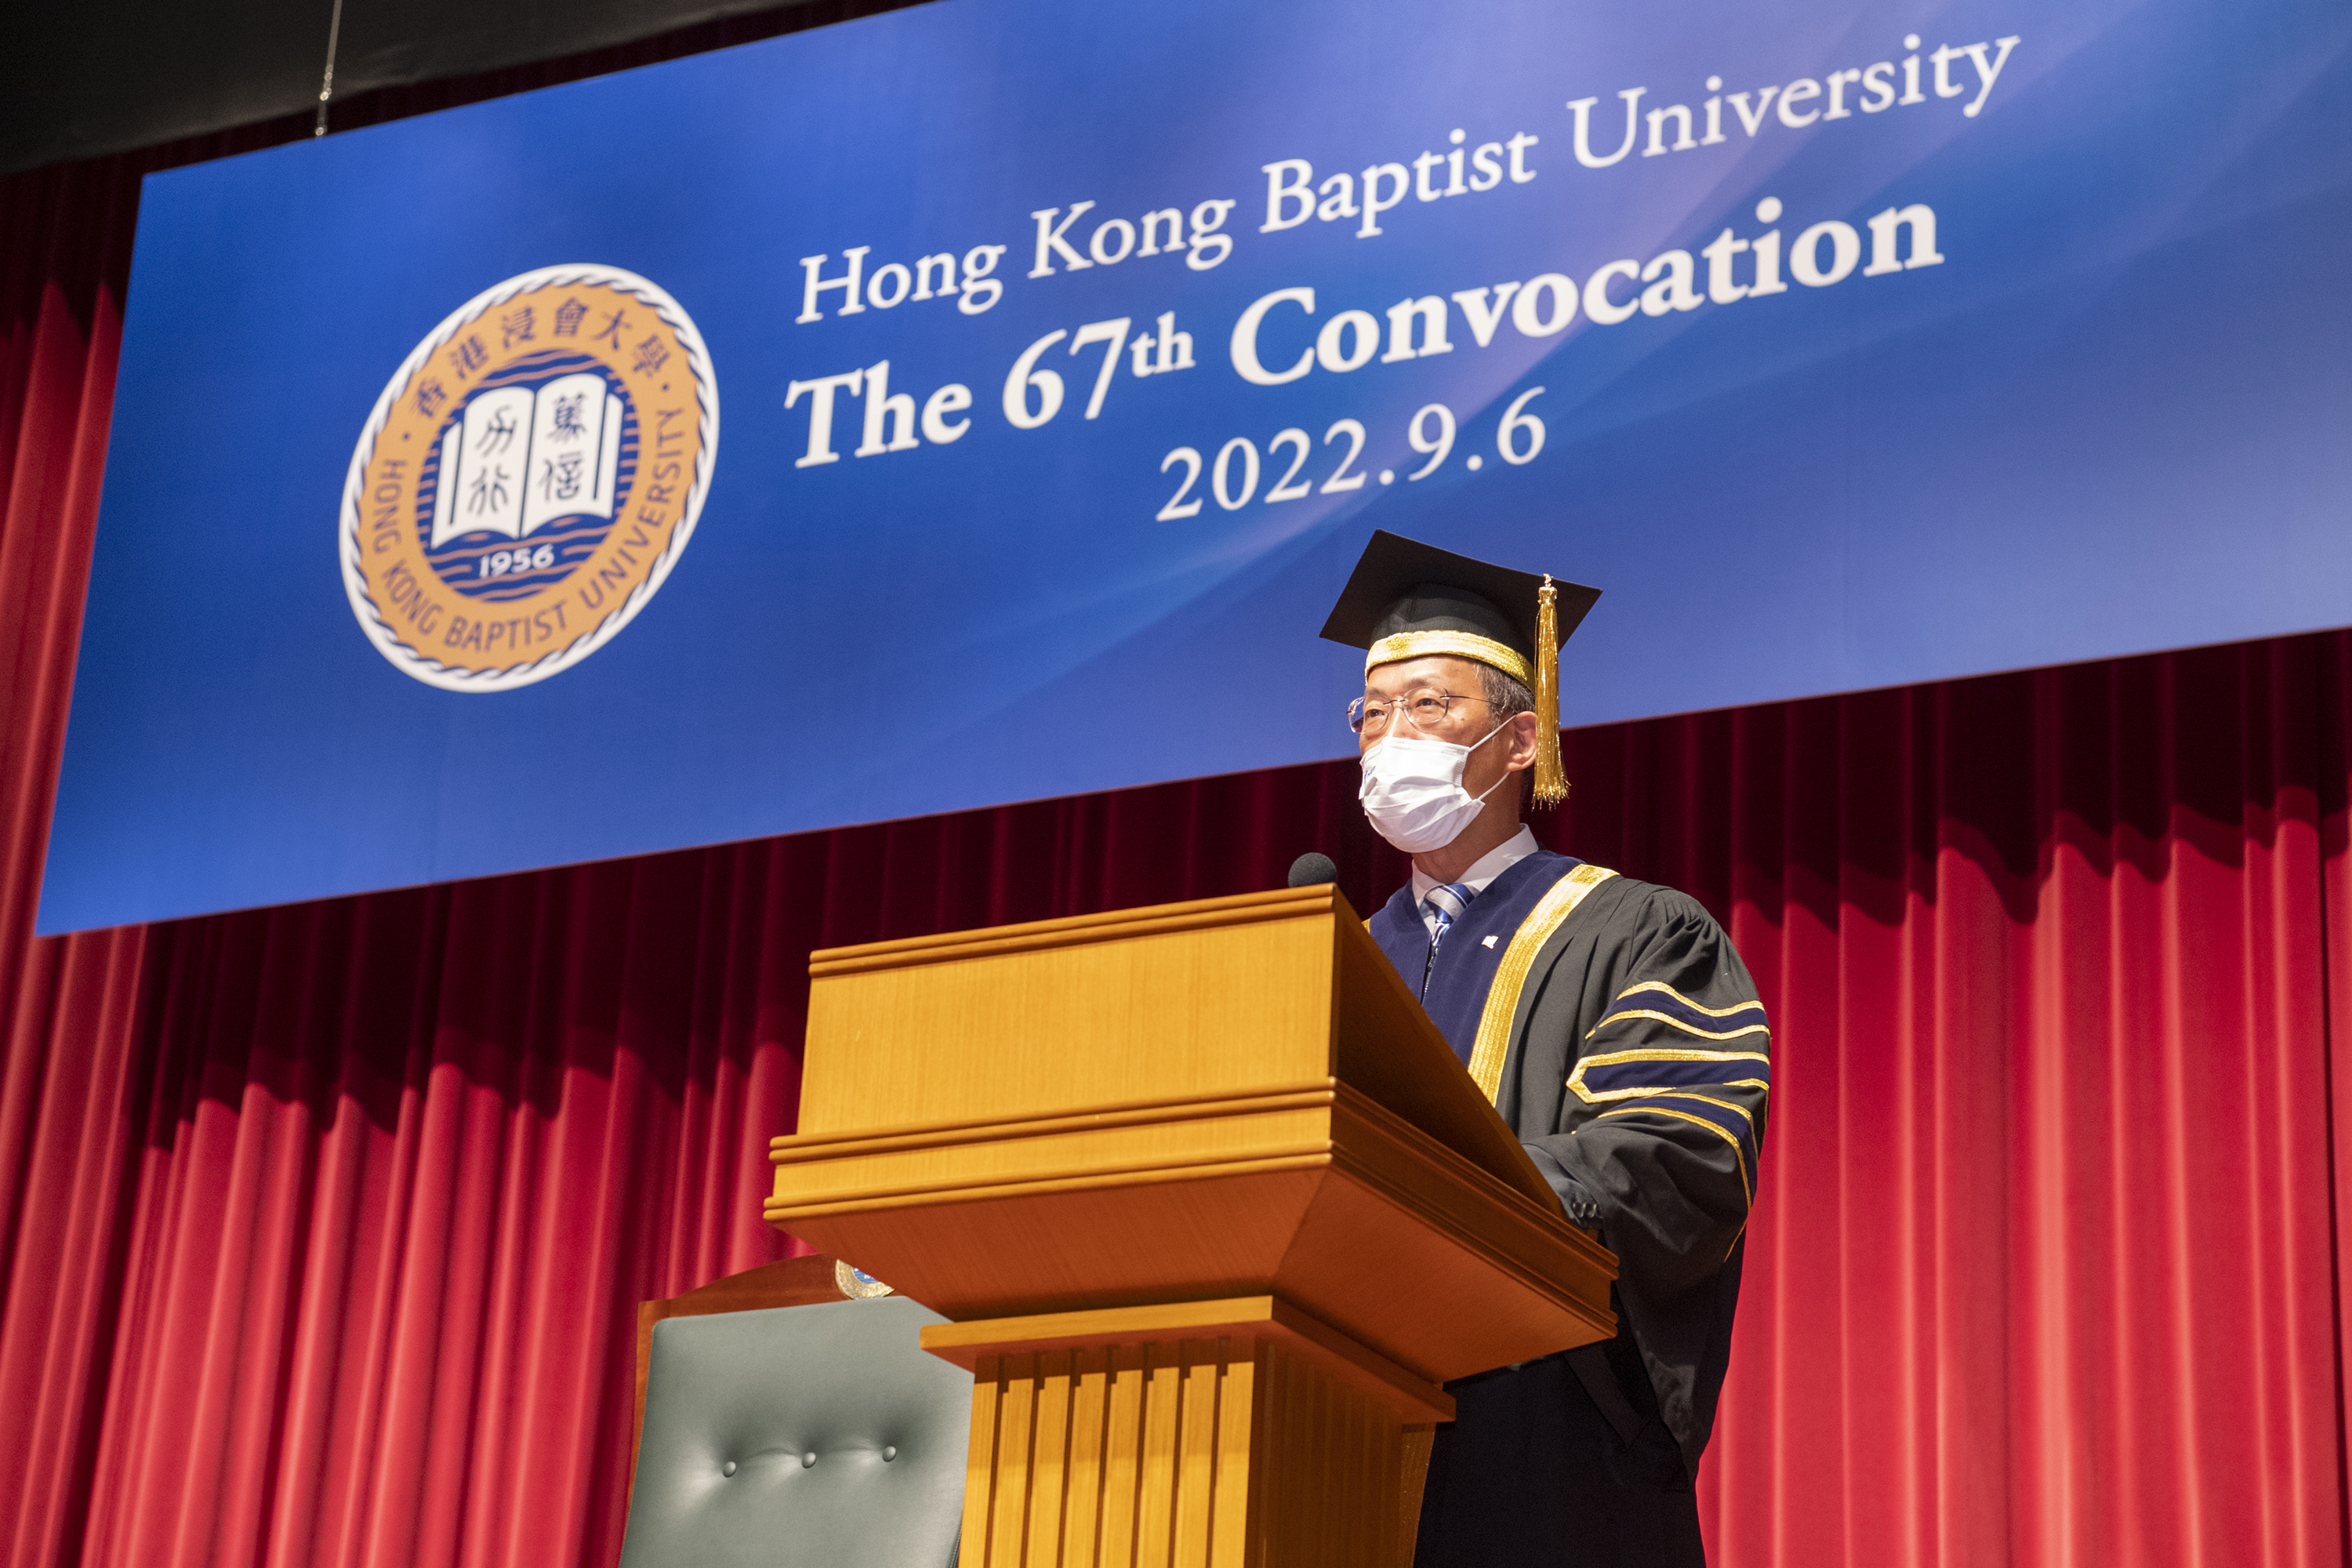 Professor Alexander Wai, President and Vice-Chancellor of HKBU, calls on the freshmen to be progress makers at the University’s 67th Convocation.